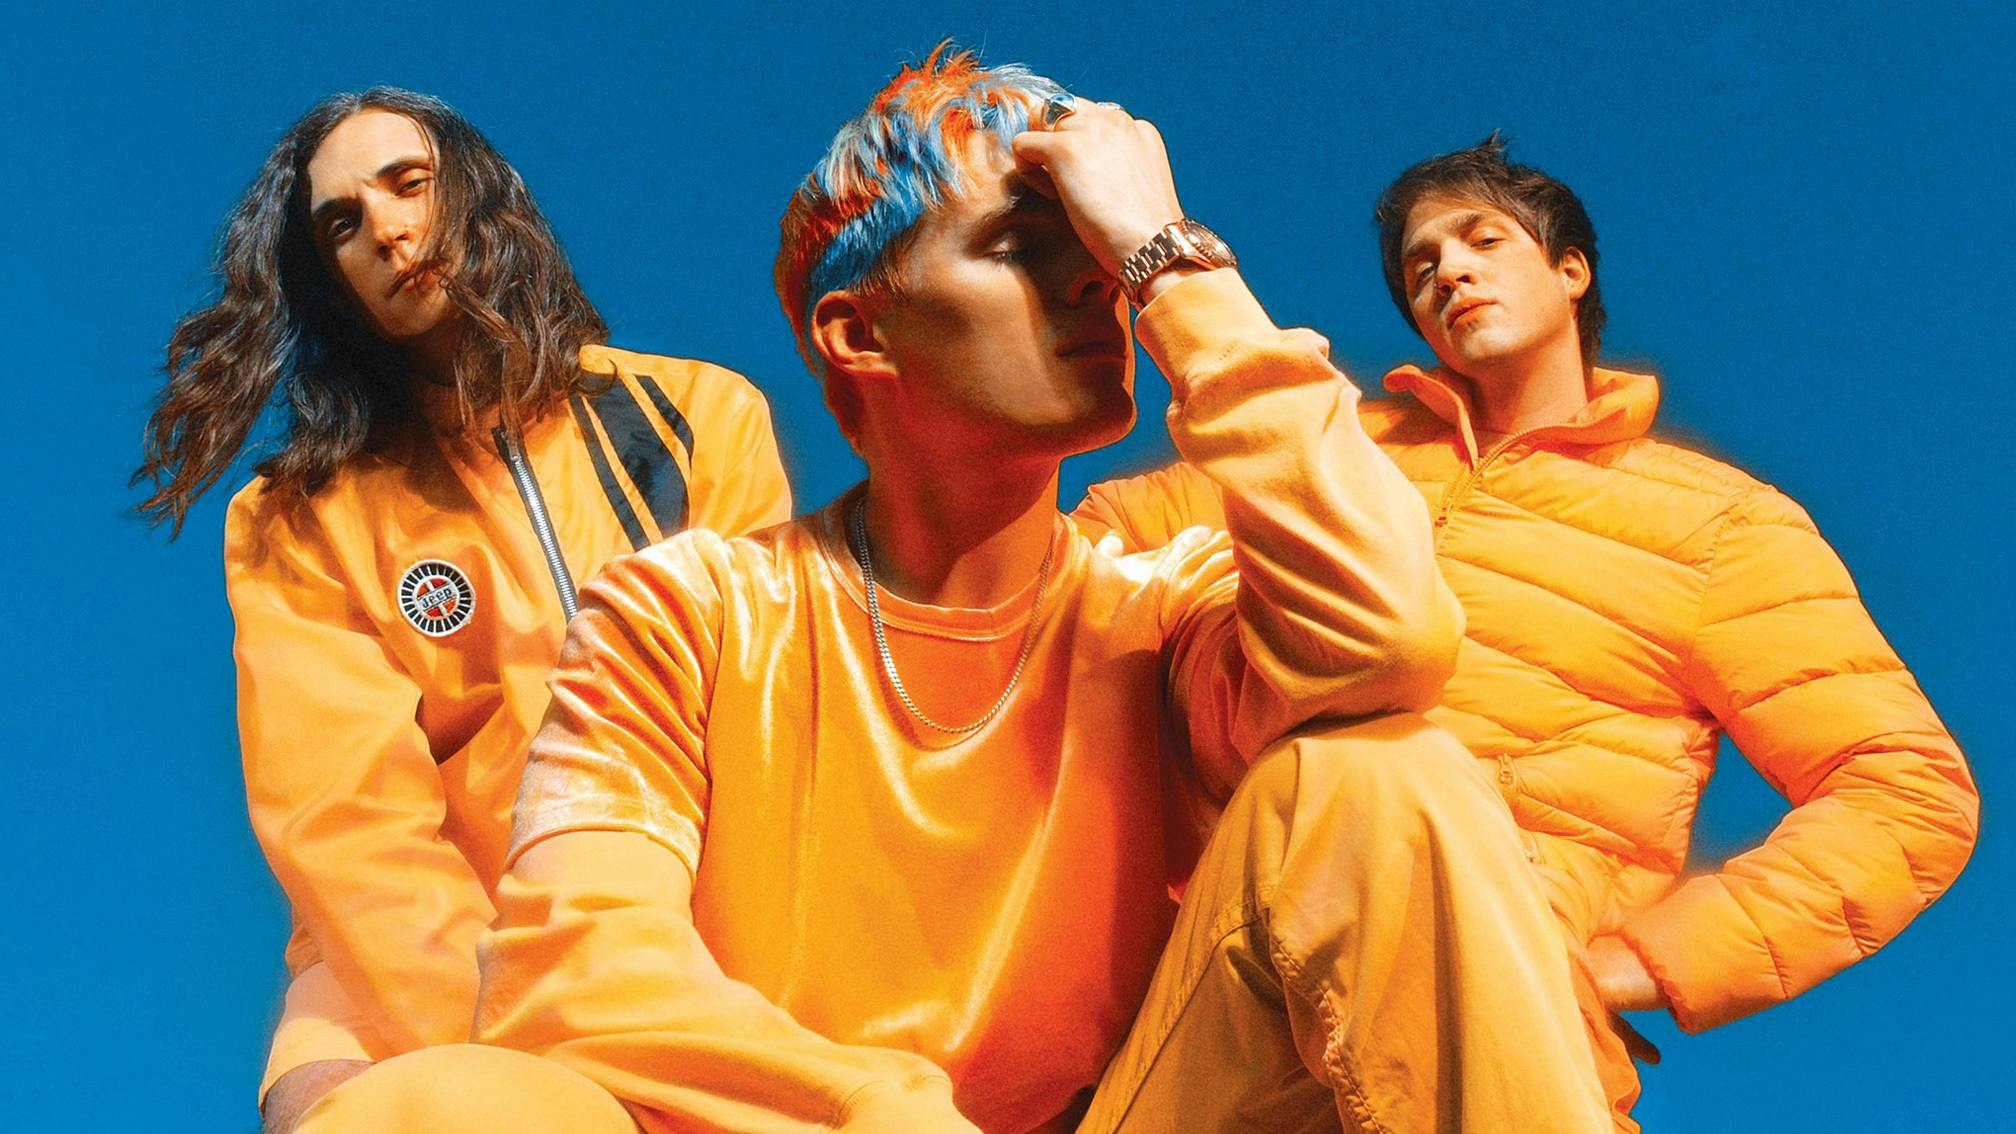 Waterparks have announced their new studio album, Greatest Hits